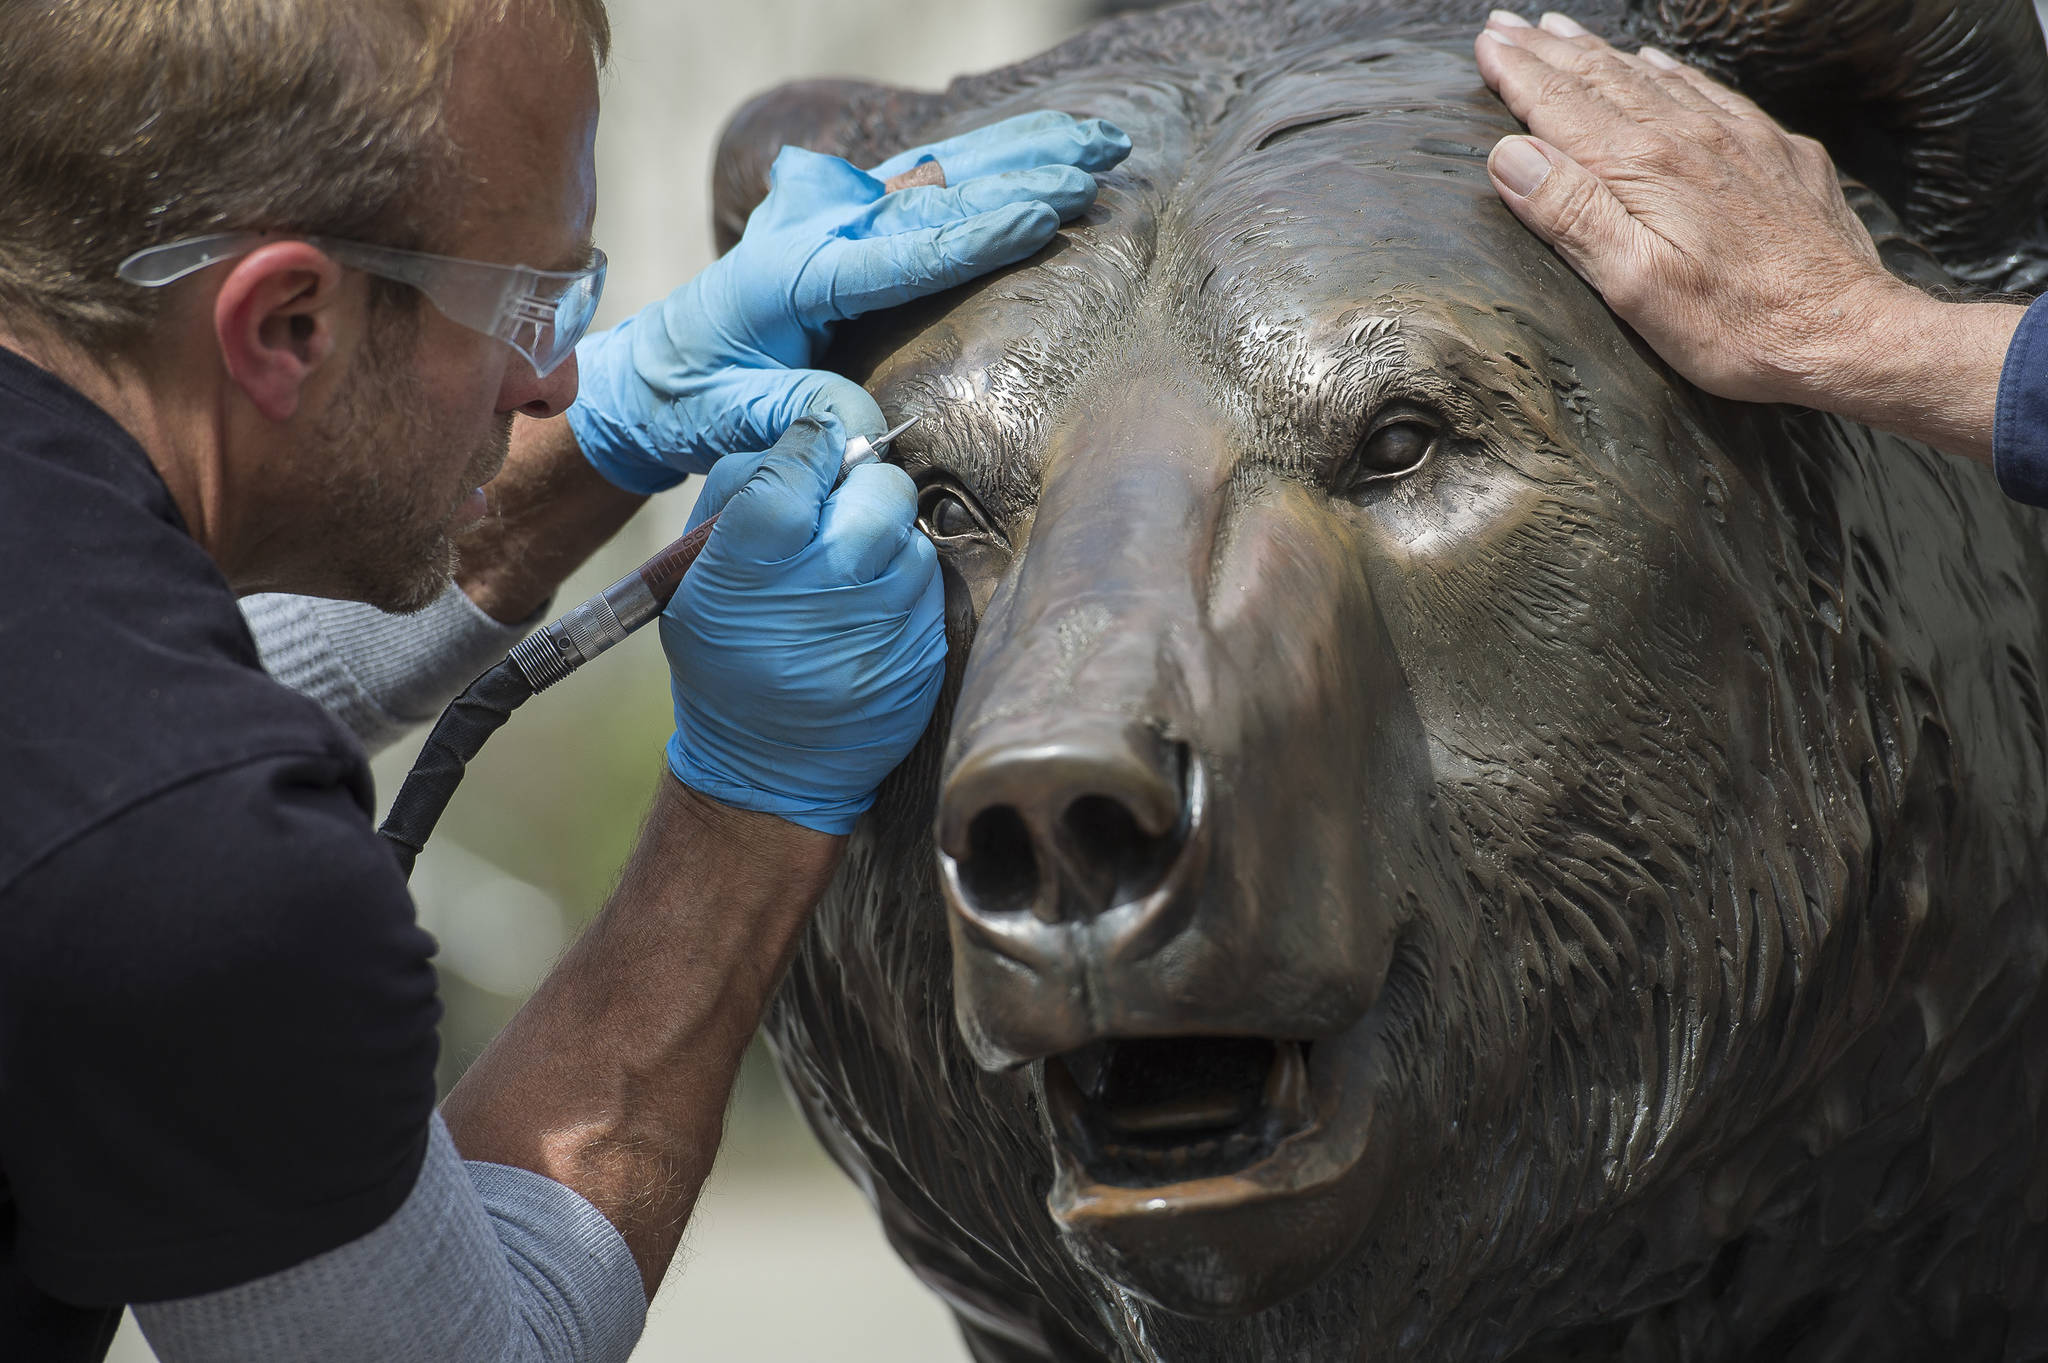 Sculpture artist R.T. “Skip” Wallen and patineur Bart Latta, of the Parks Bronze foundry in Enterprise, Oregon, work to give Wallen’s bronze bear sculpture, Windfall Fisherman, a 30-year cleanup on Main Street on Thursday, May 10, 2018. Wallen and Latta were etching details that have worn off since it was installed in 1988. Wallen said the work is “making a friendlier bear out of it. That’s part of the expression that has bothered me for 30 years.” (Michael Penn | Juneau Empire)